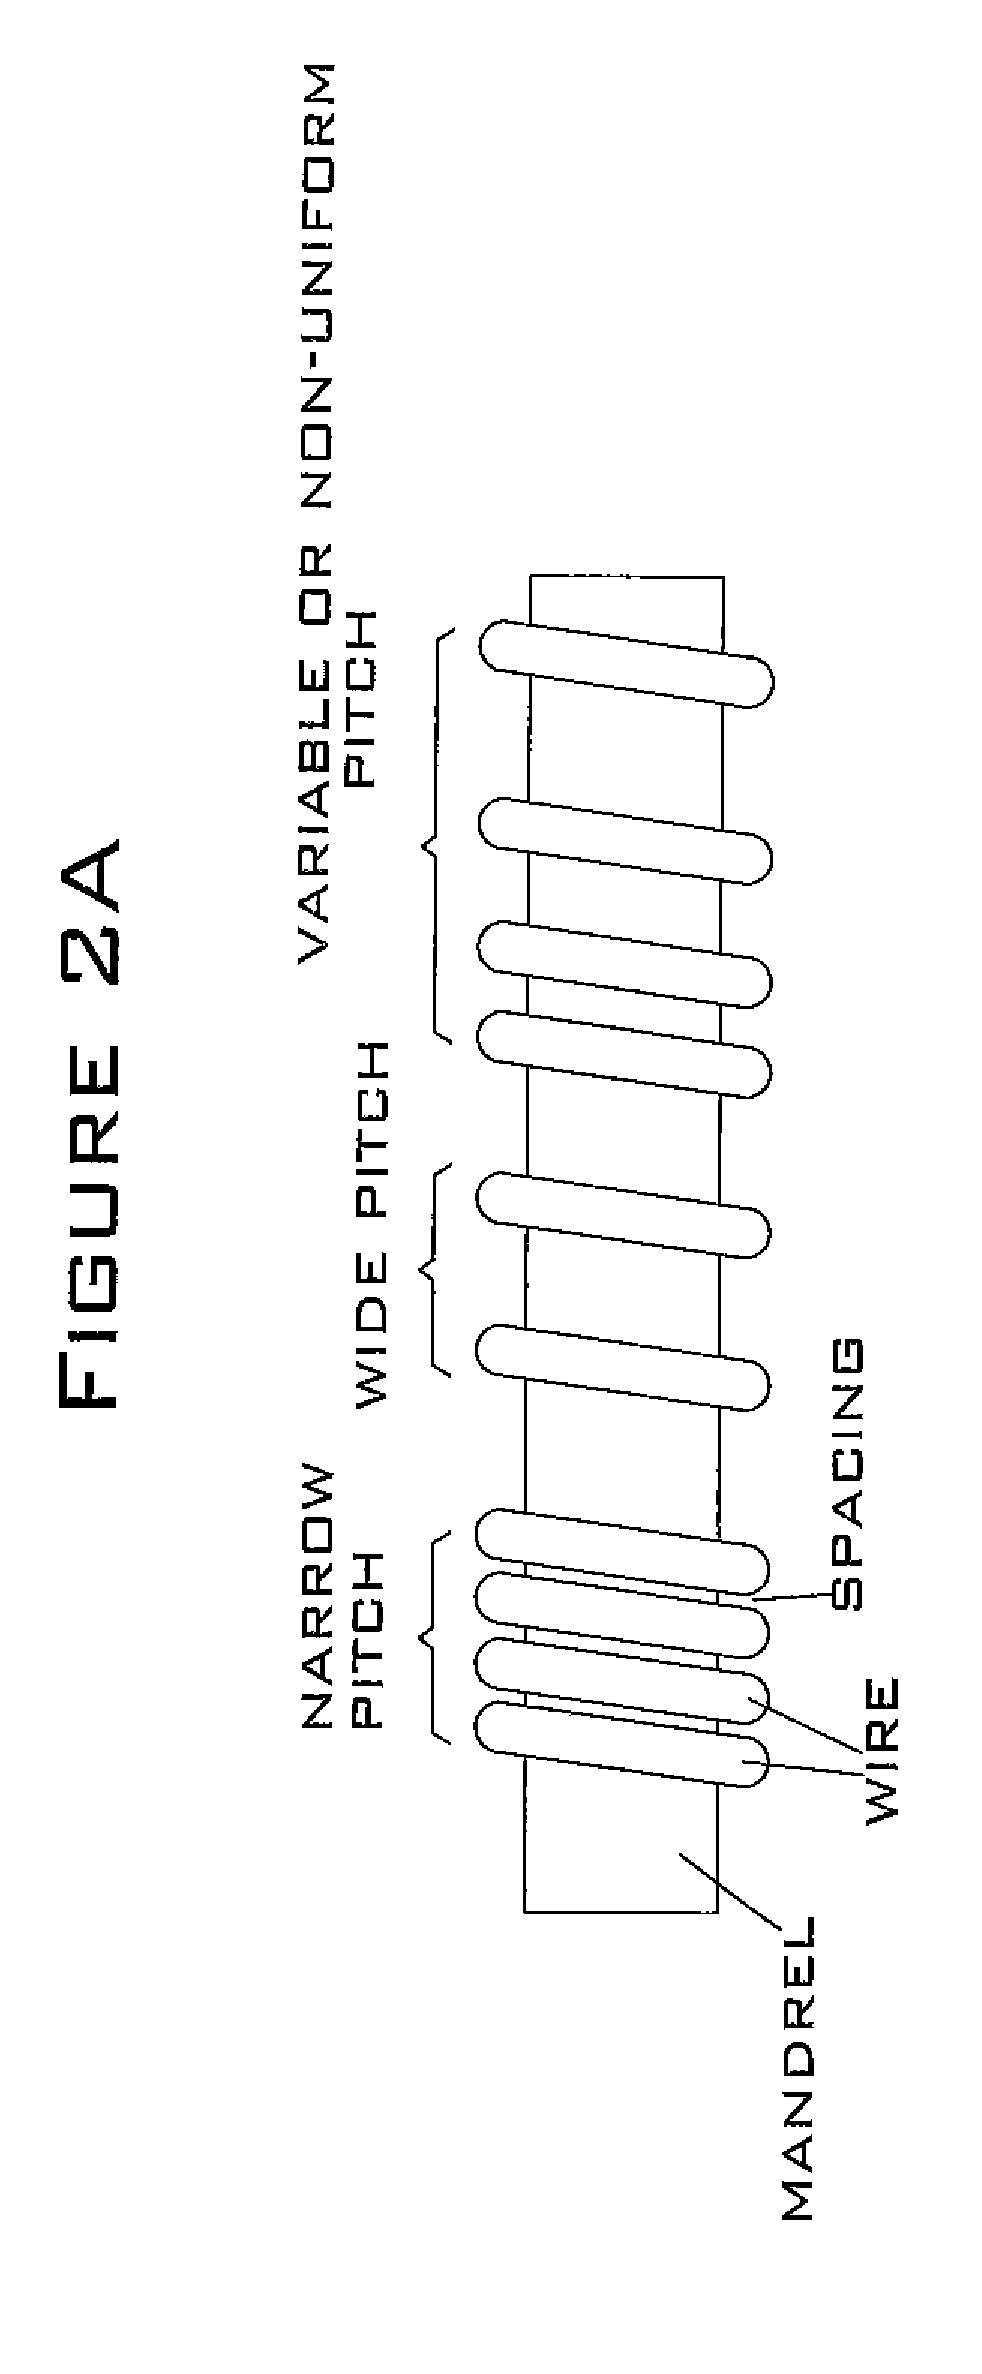 Linear variable differential transformer with complimentary step-winding secondary coils